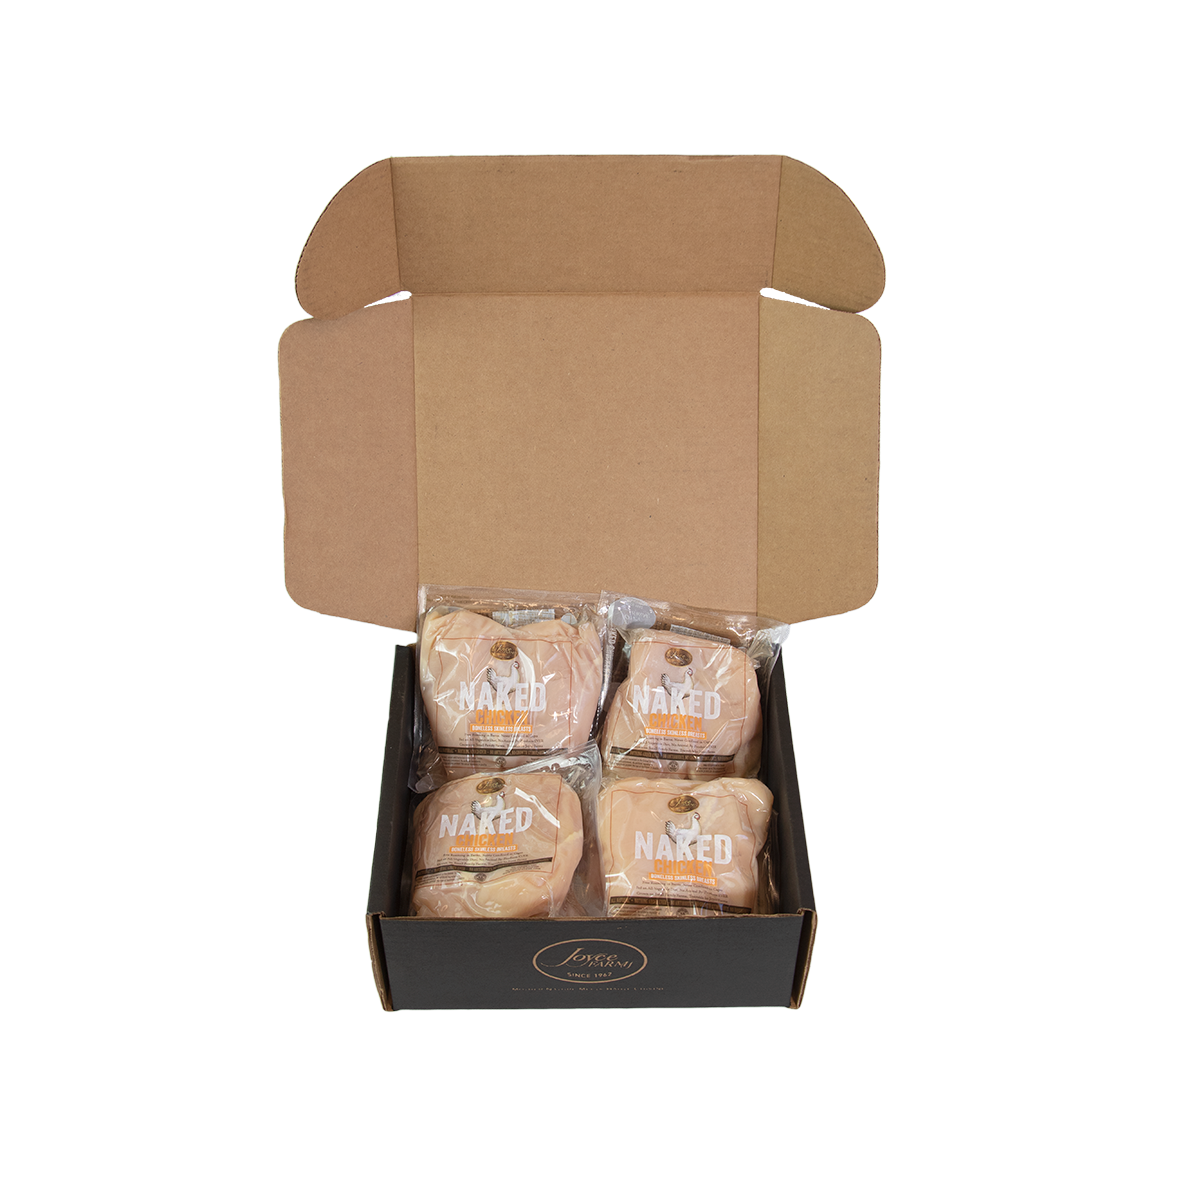 A box containing four pieces of Joyce Farms boneless skinless chicken breasts in a brown box.